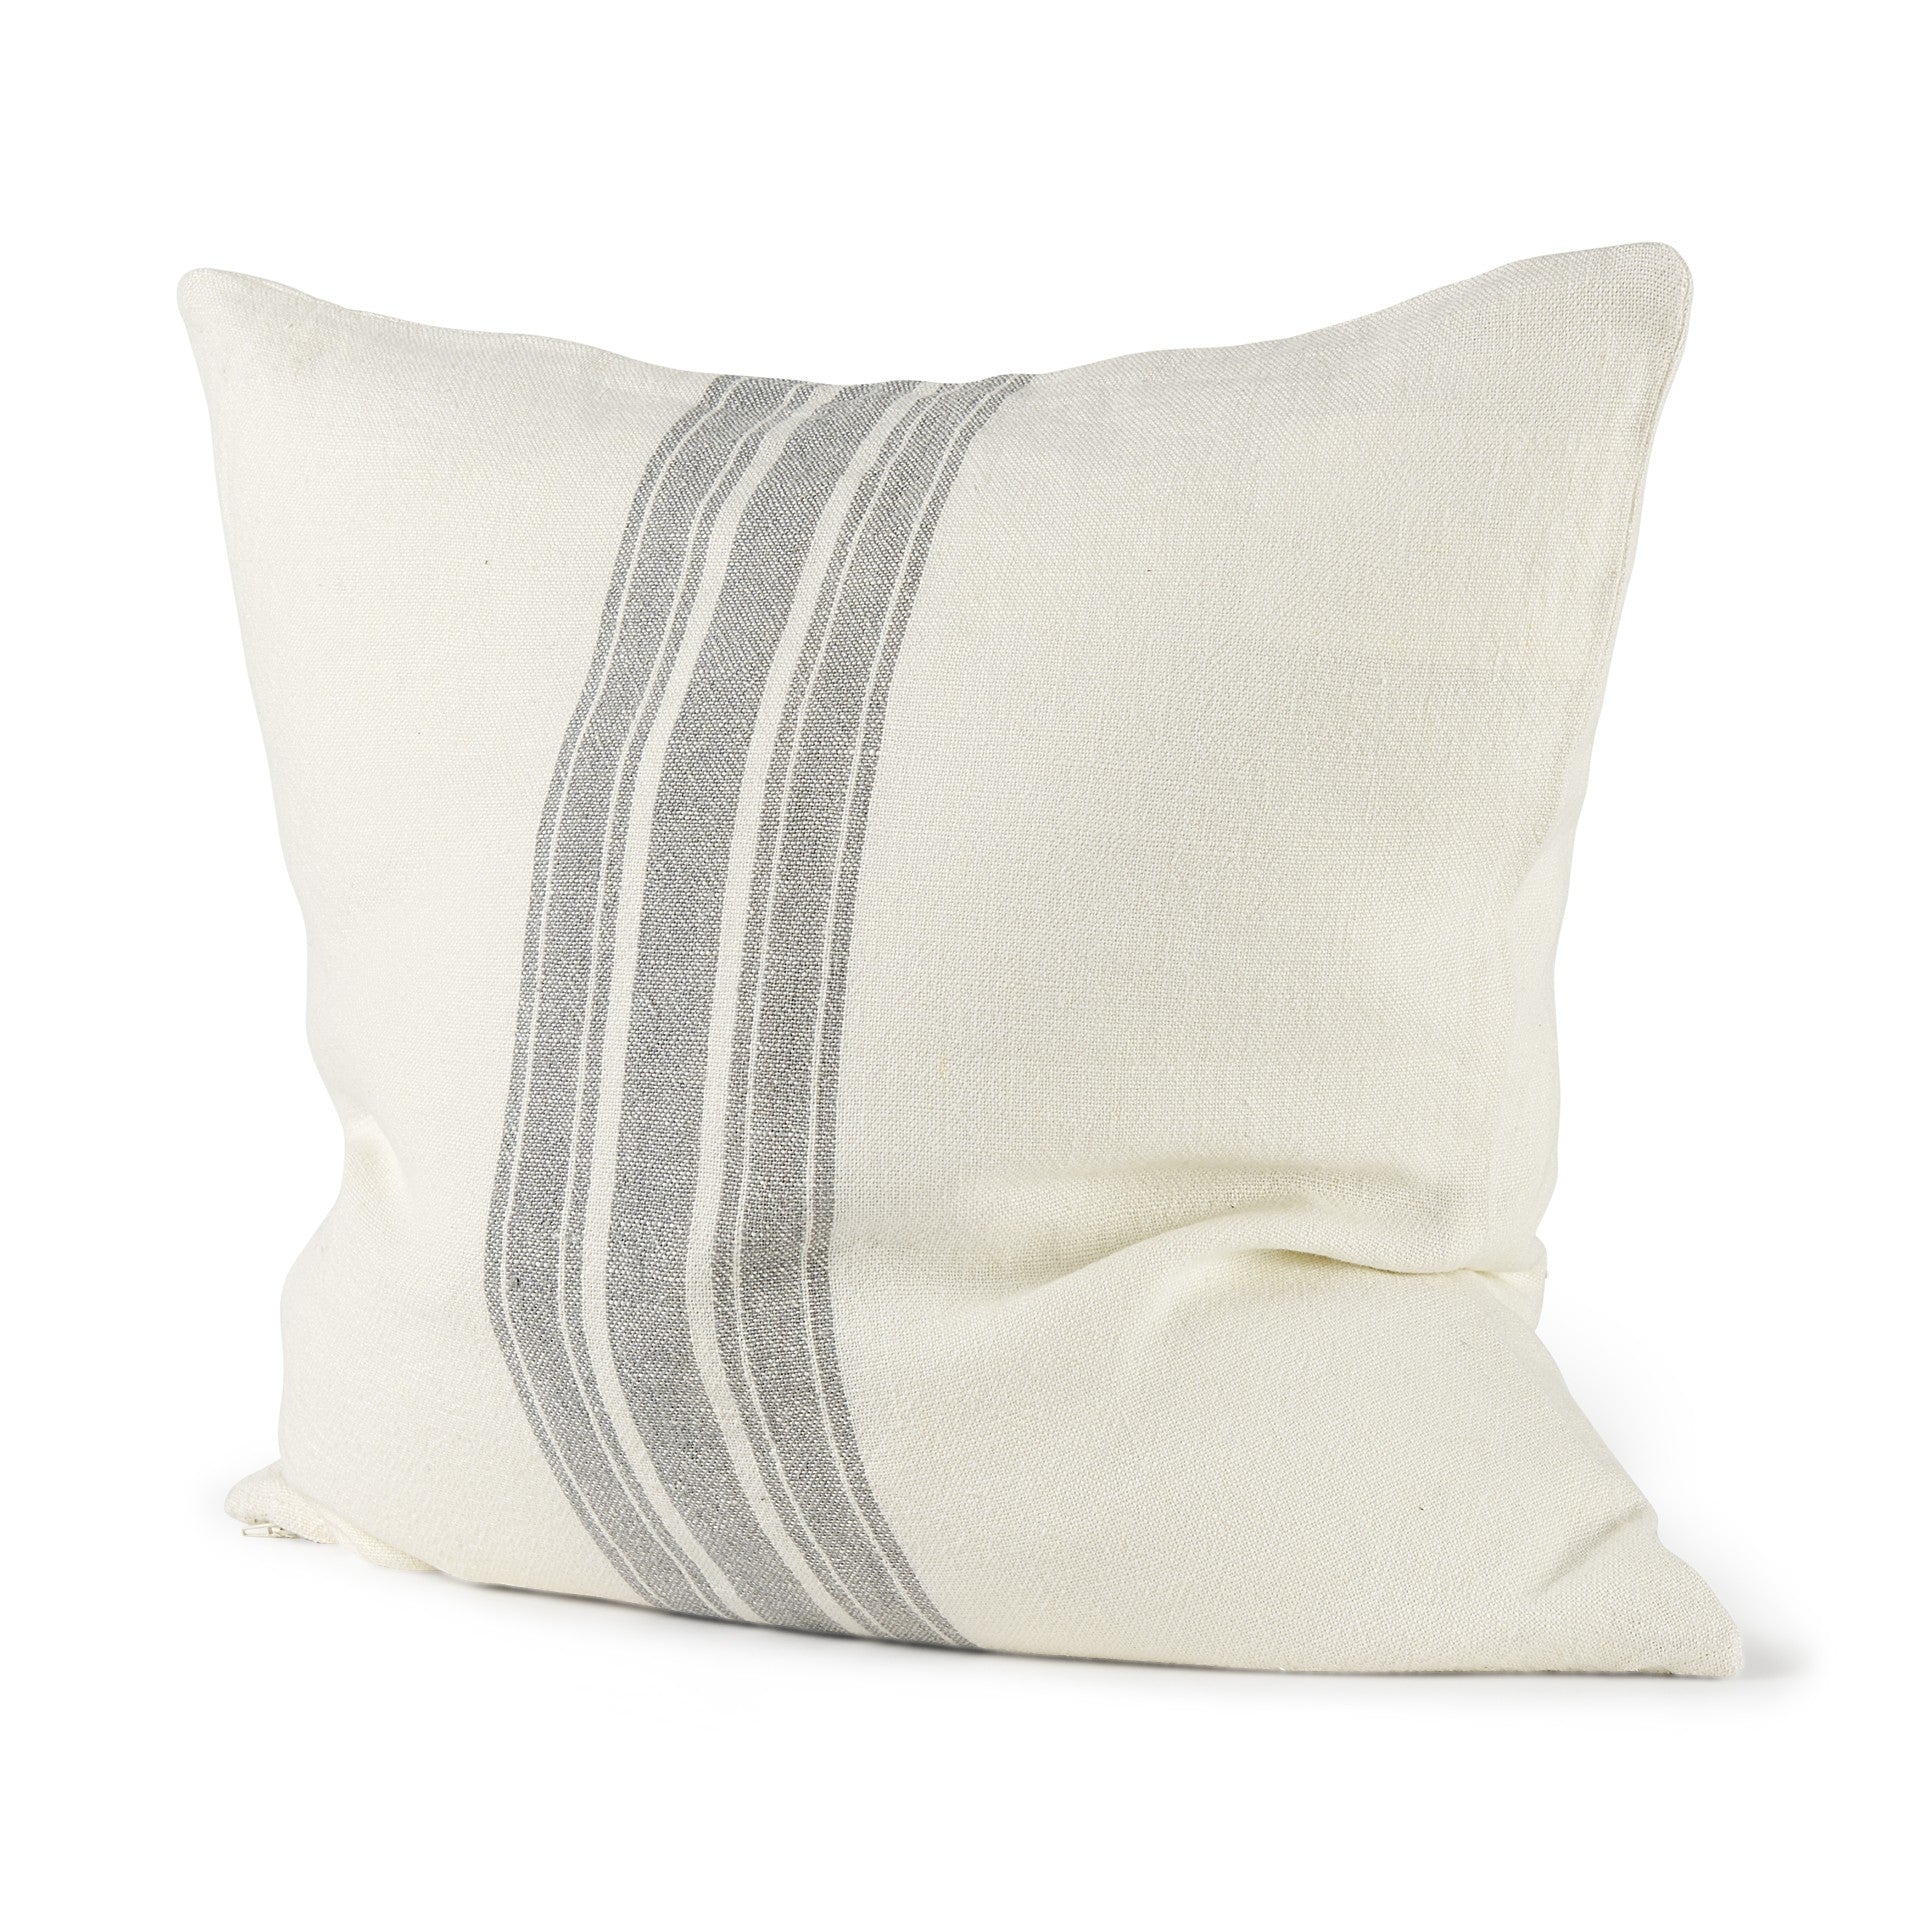 Off White Pillow Cover With  Ash Gray  Stripes